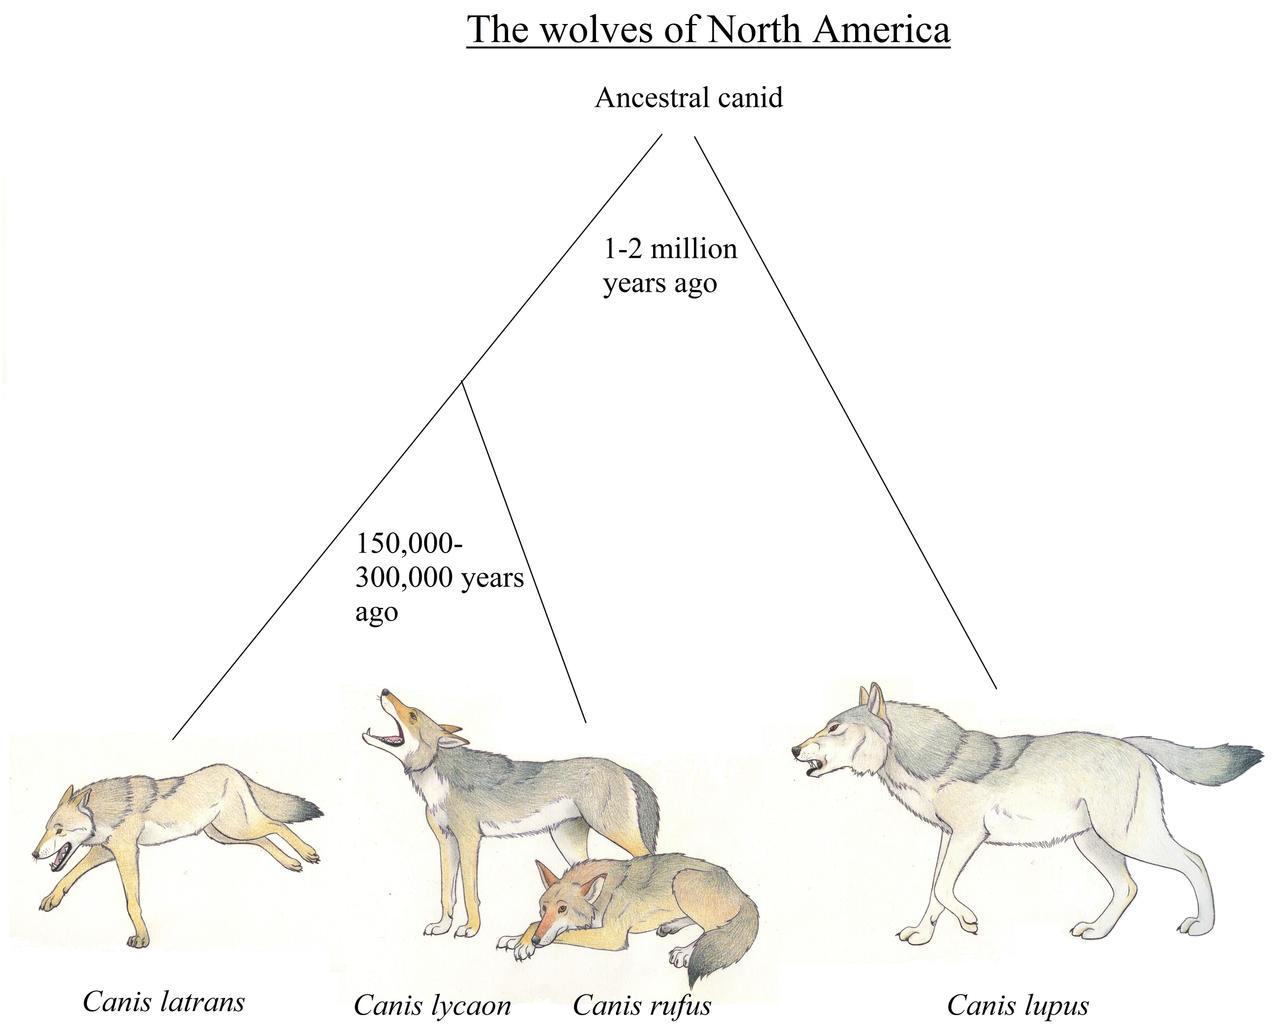 What are the similarities and differences between a wolf and a hyena?